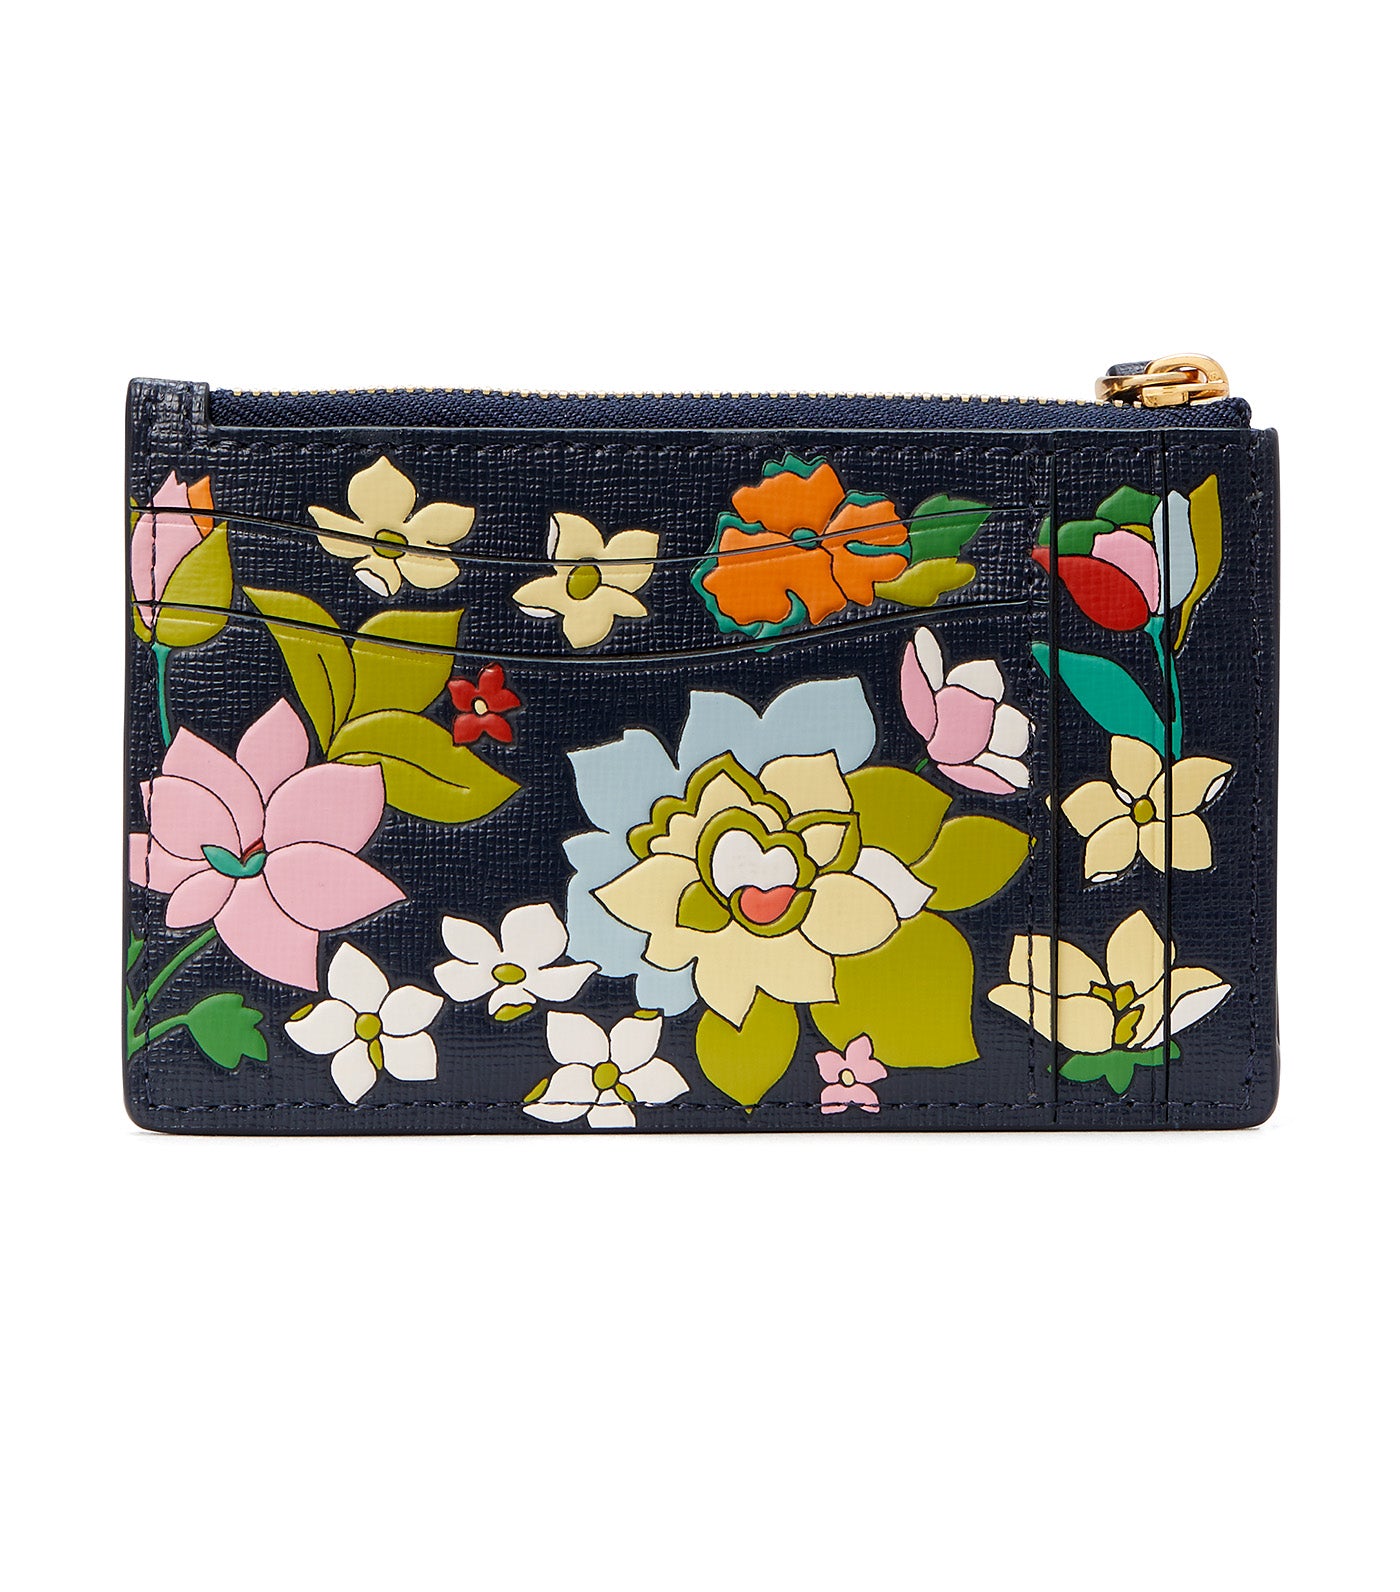 kate spade new york Morgan Flower Bed Embossed Saffiano Leather